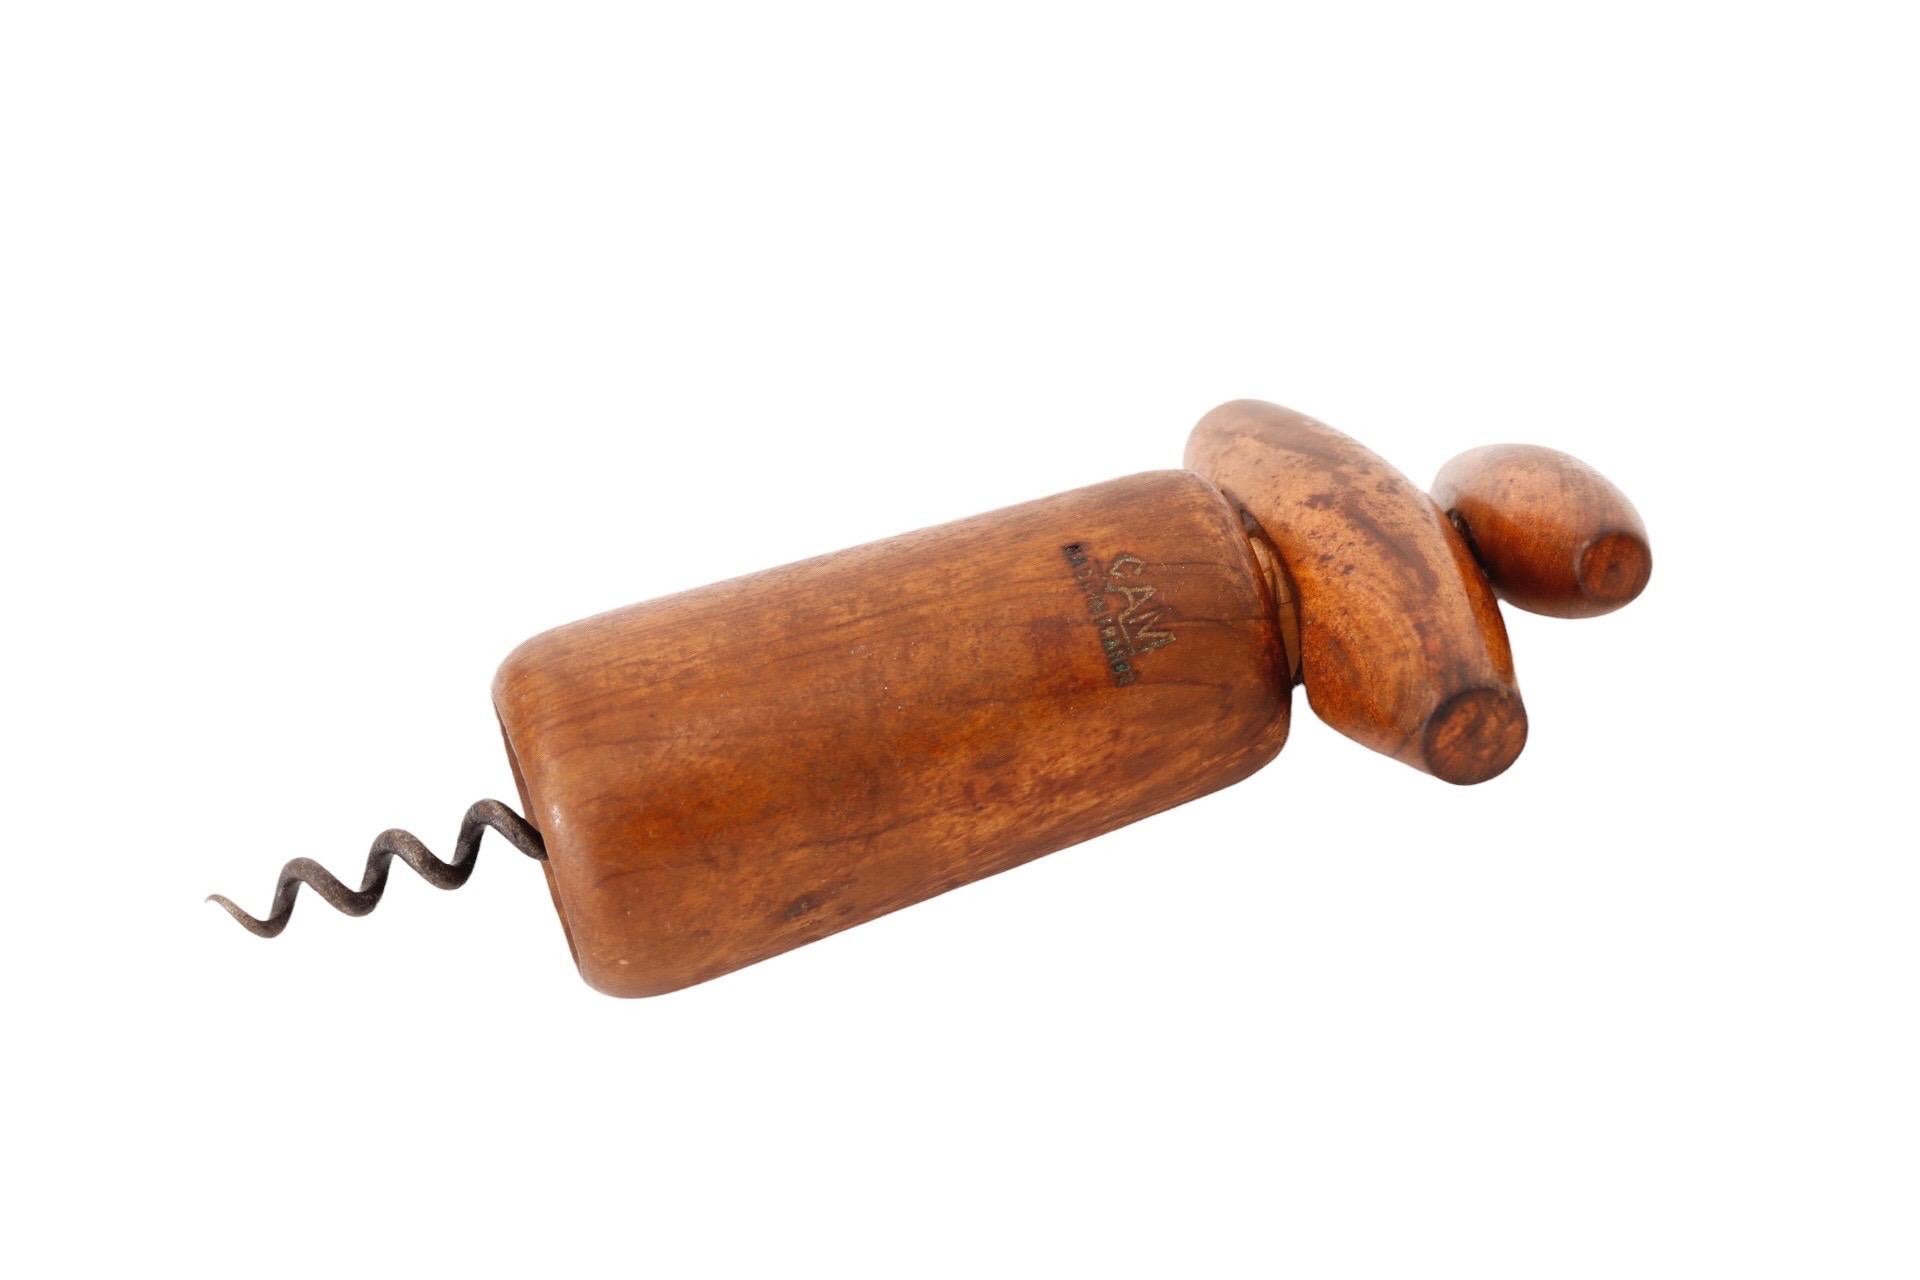 A French mid century waiter’s corkscrew in maple, made by CAM. The double handle design allows you to remove the cork by turning first the top handle then both together in the same direction. Handles are inlaid with blonde maple at each side. Marked